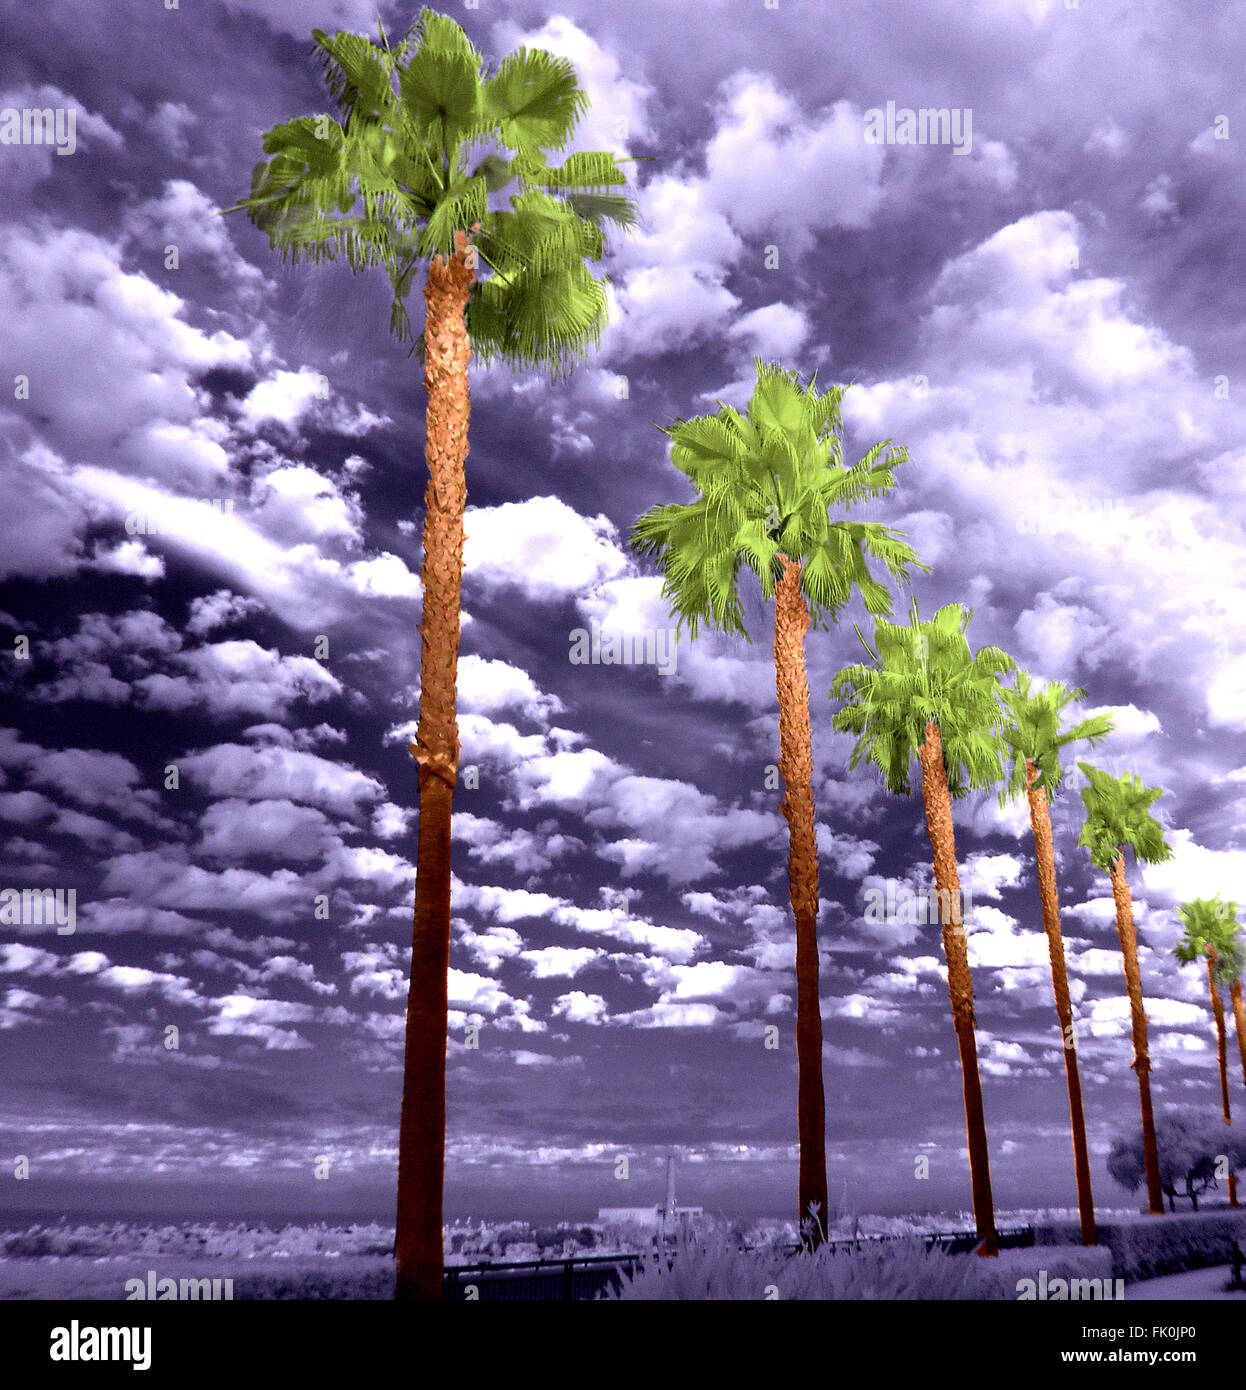 Palm trees  on the California cost, high contrast black & white sky with green and brown palm trees in foreground. Stock Photo